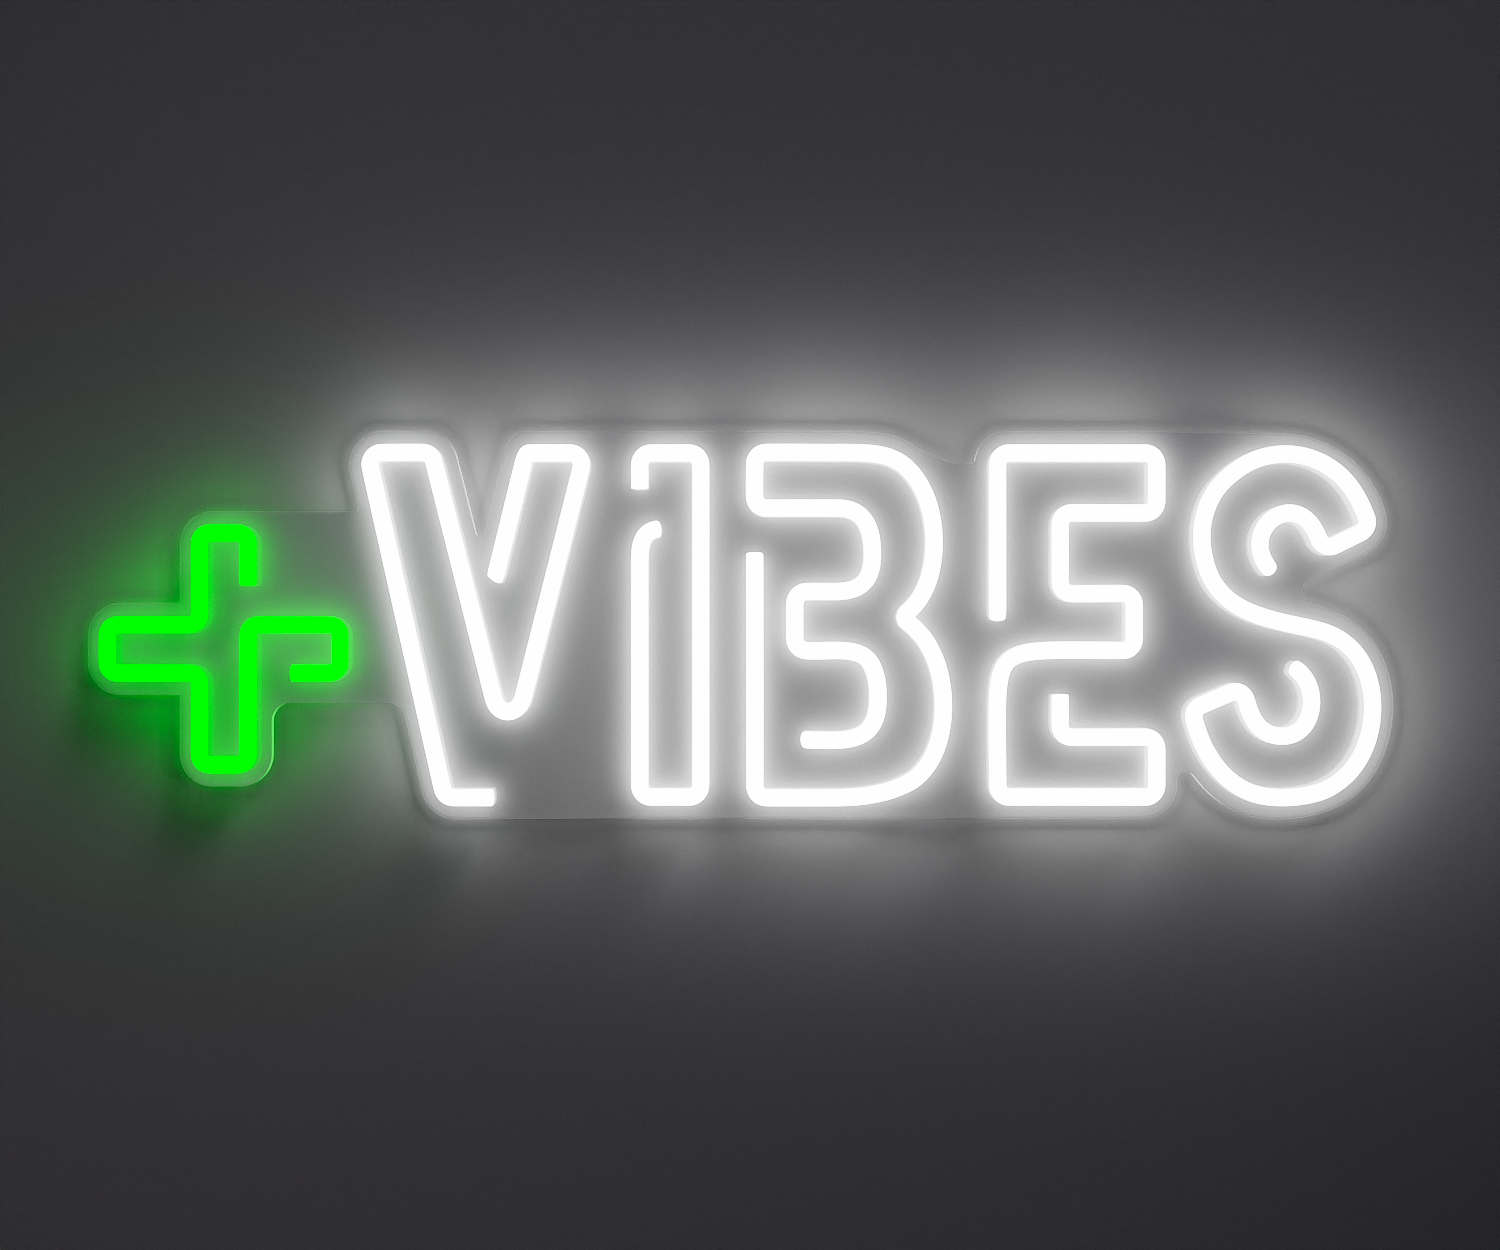 A green white and positive vibes neon sign